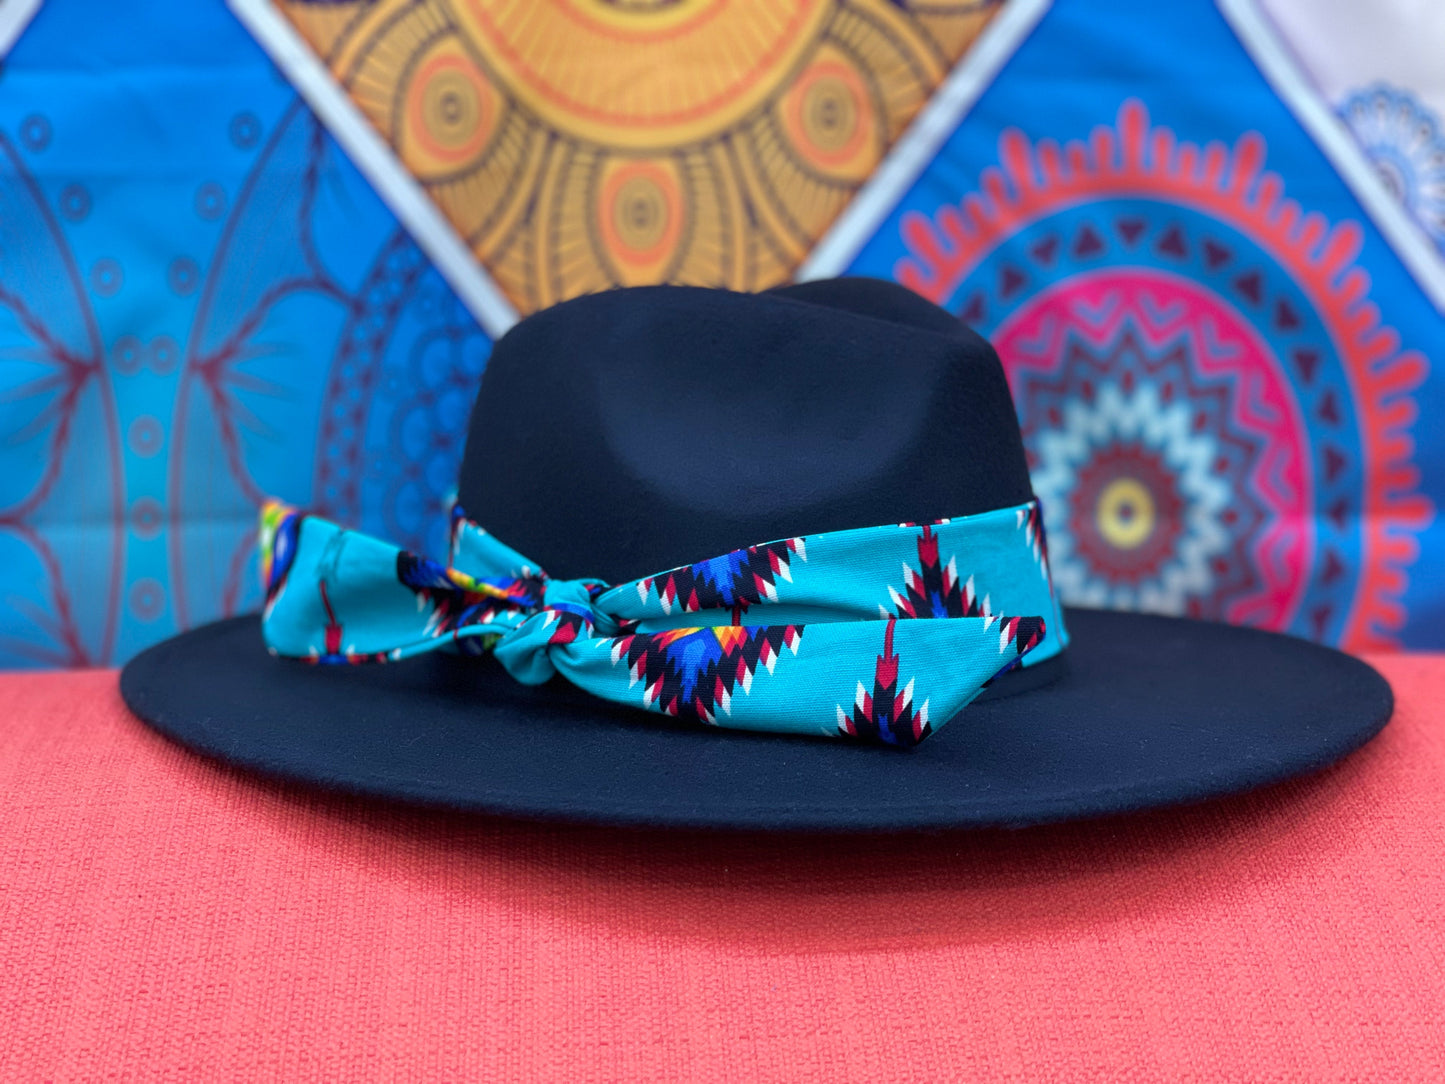 Sweet Aztec Print Hat Bands [All Styles]